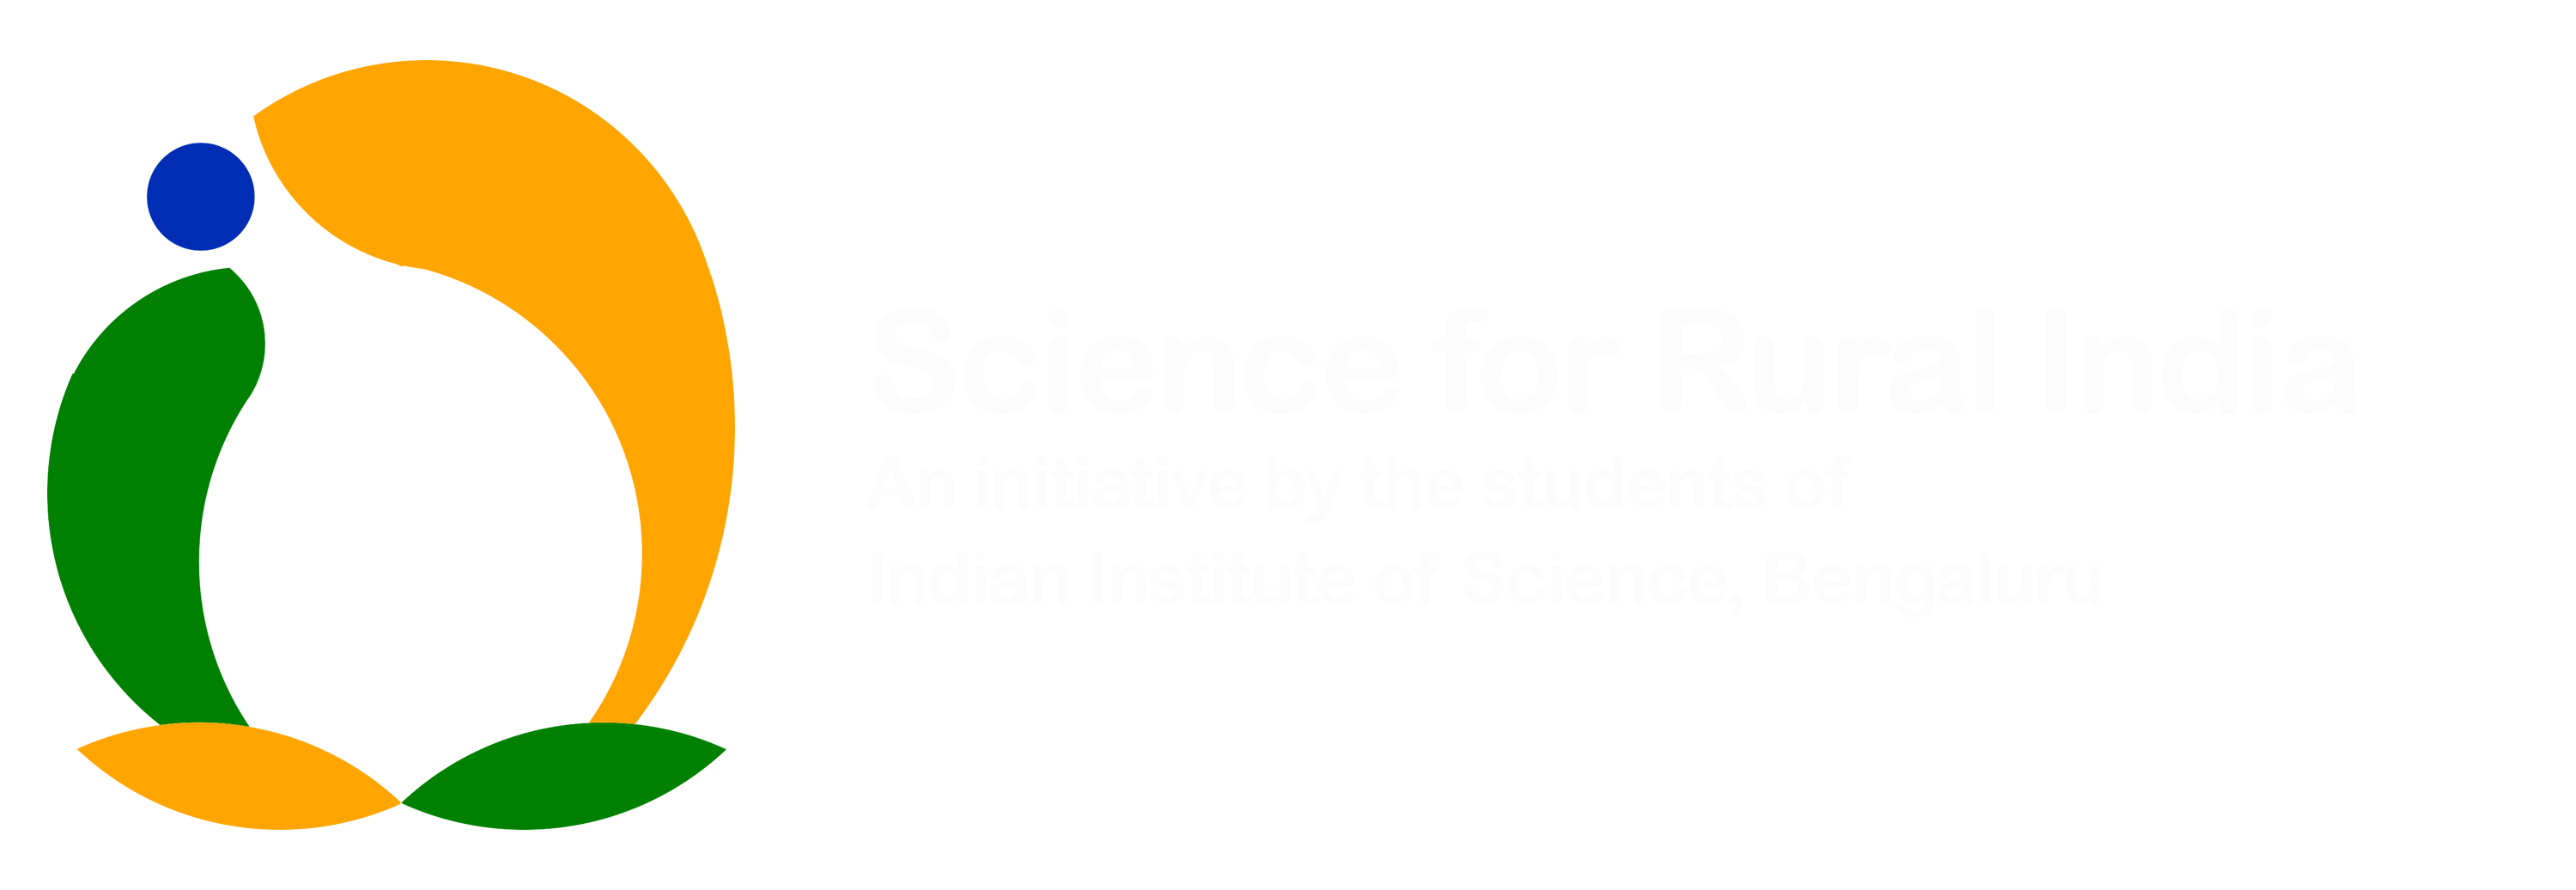 Science for Rural India